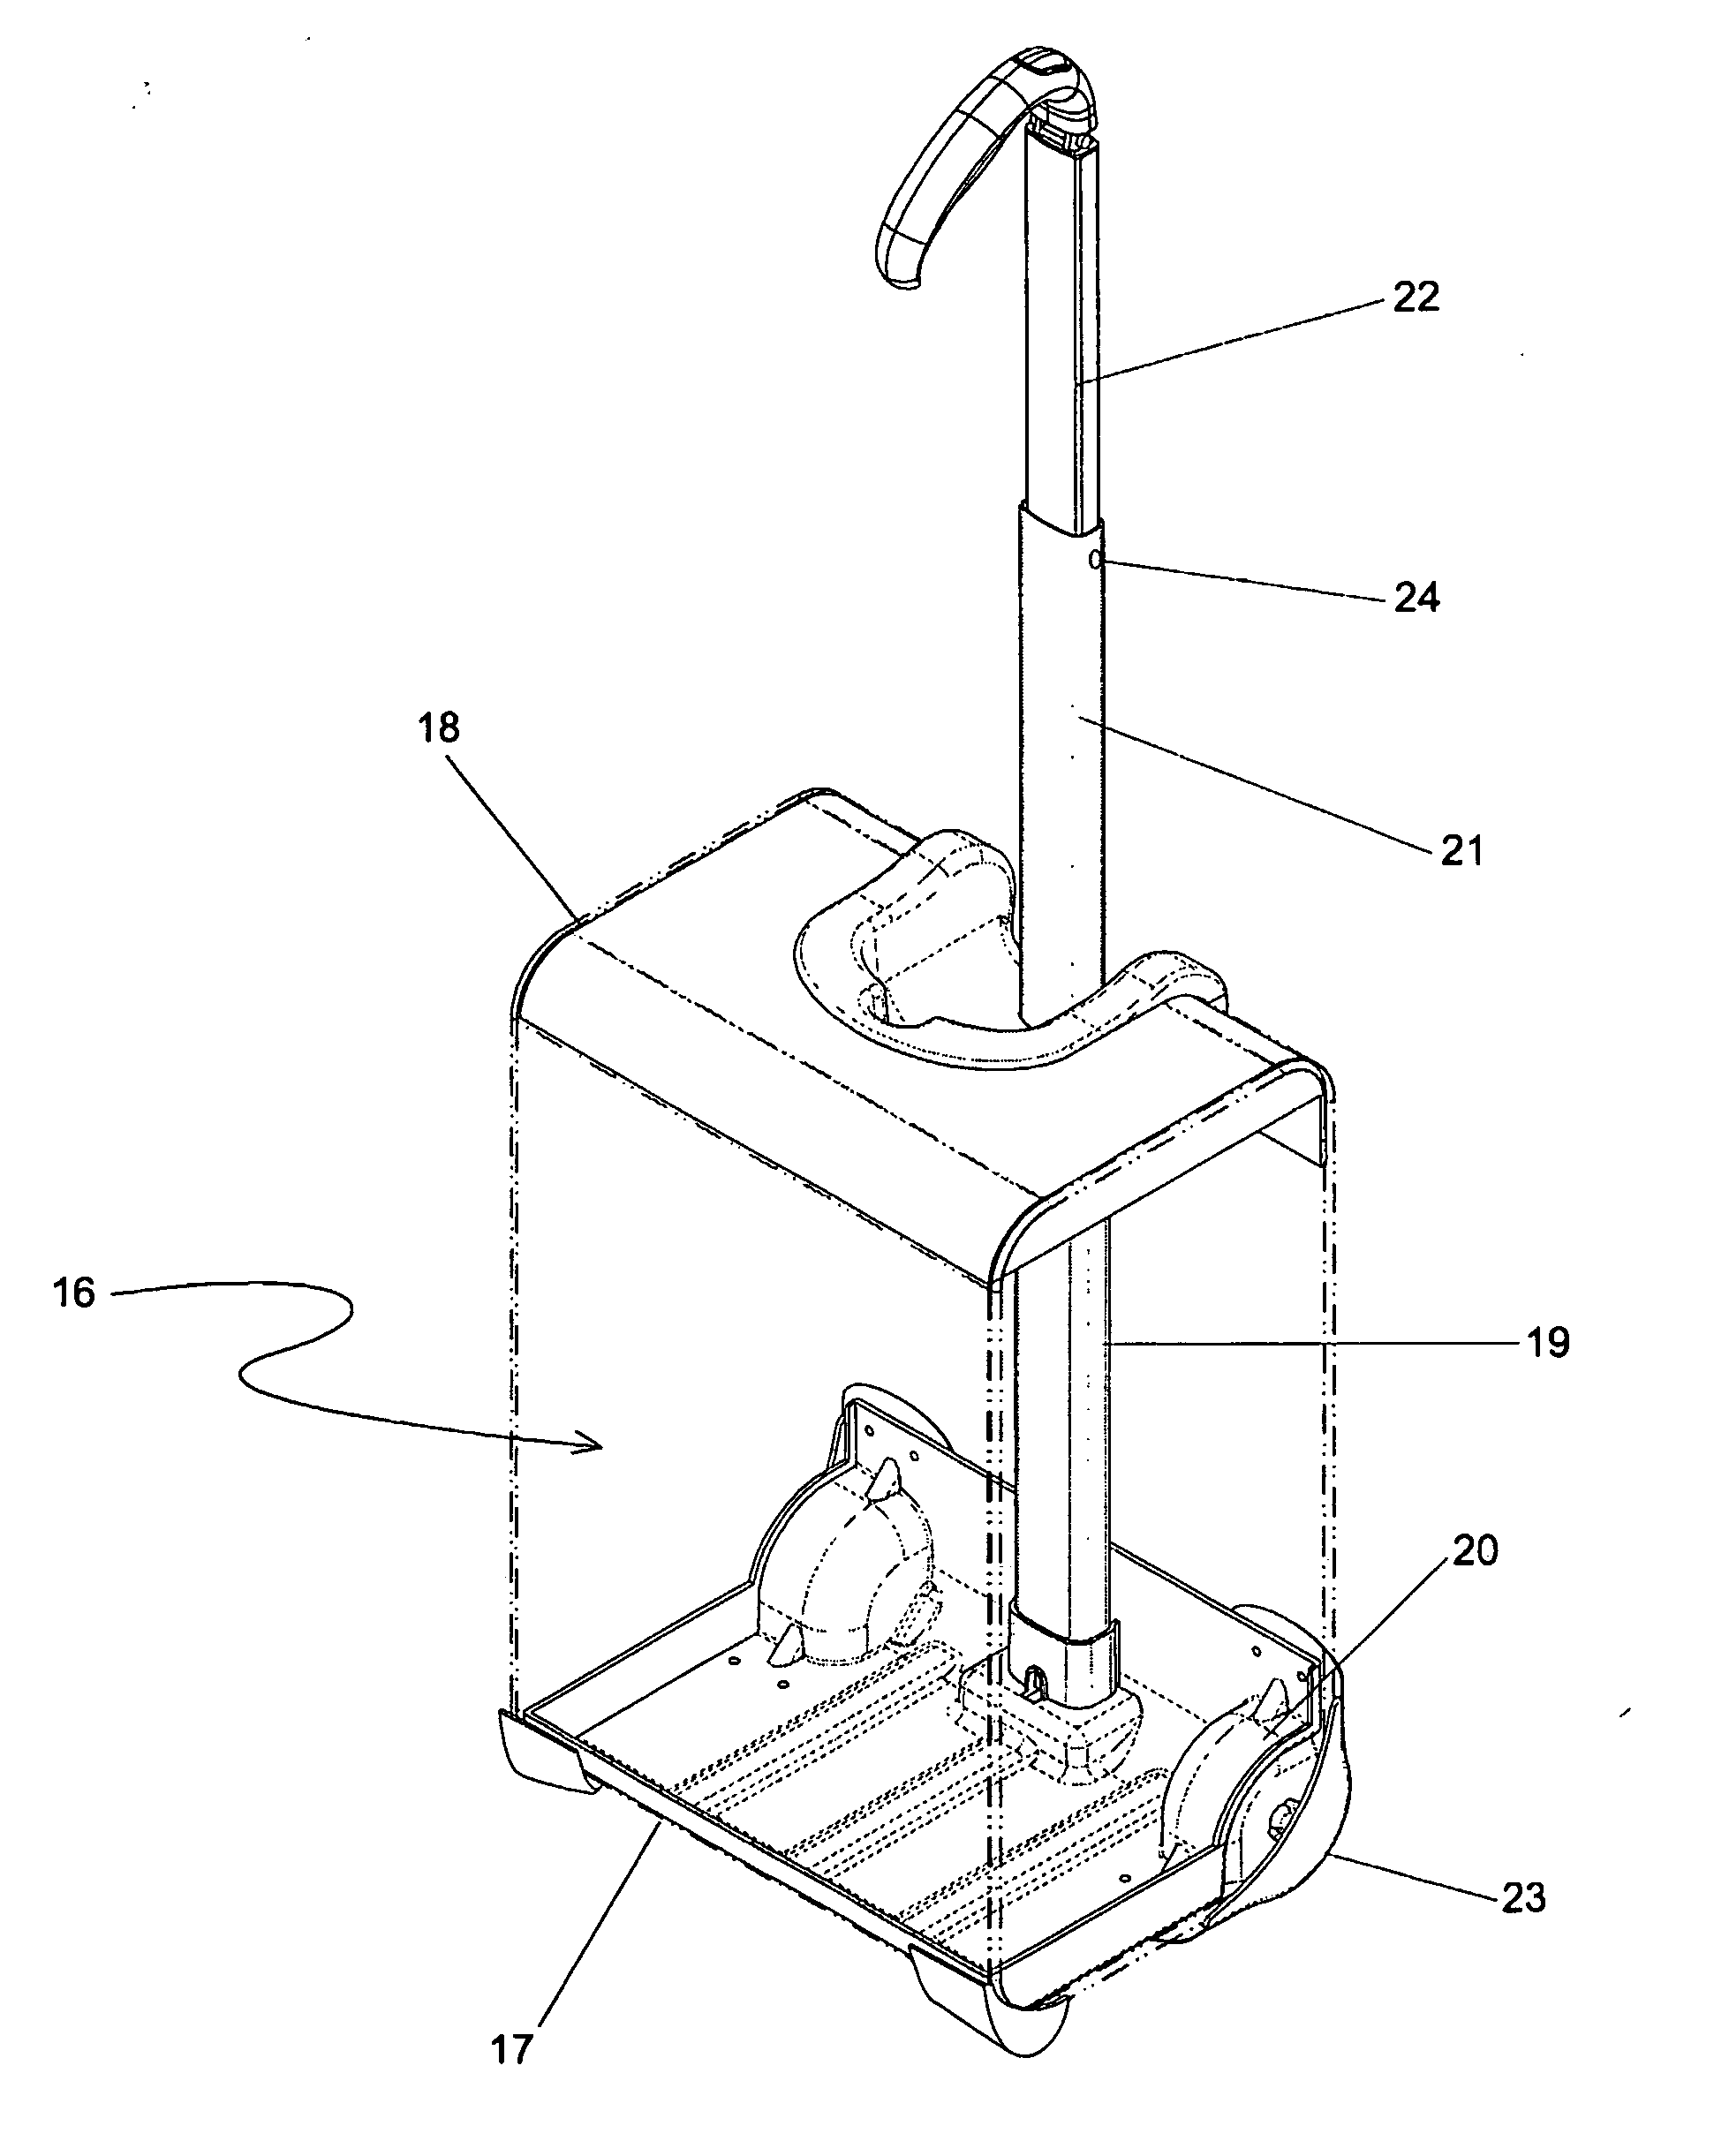 Handle apparatus for luggage case